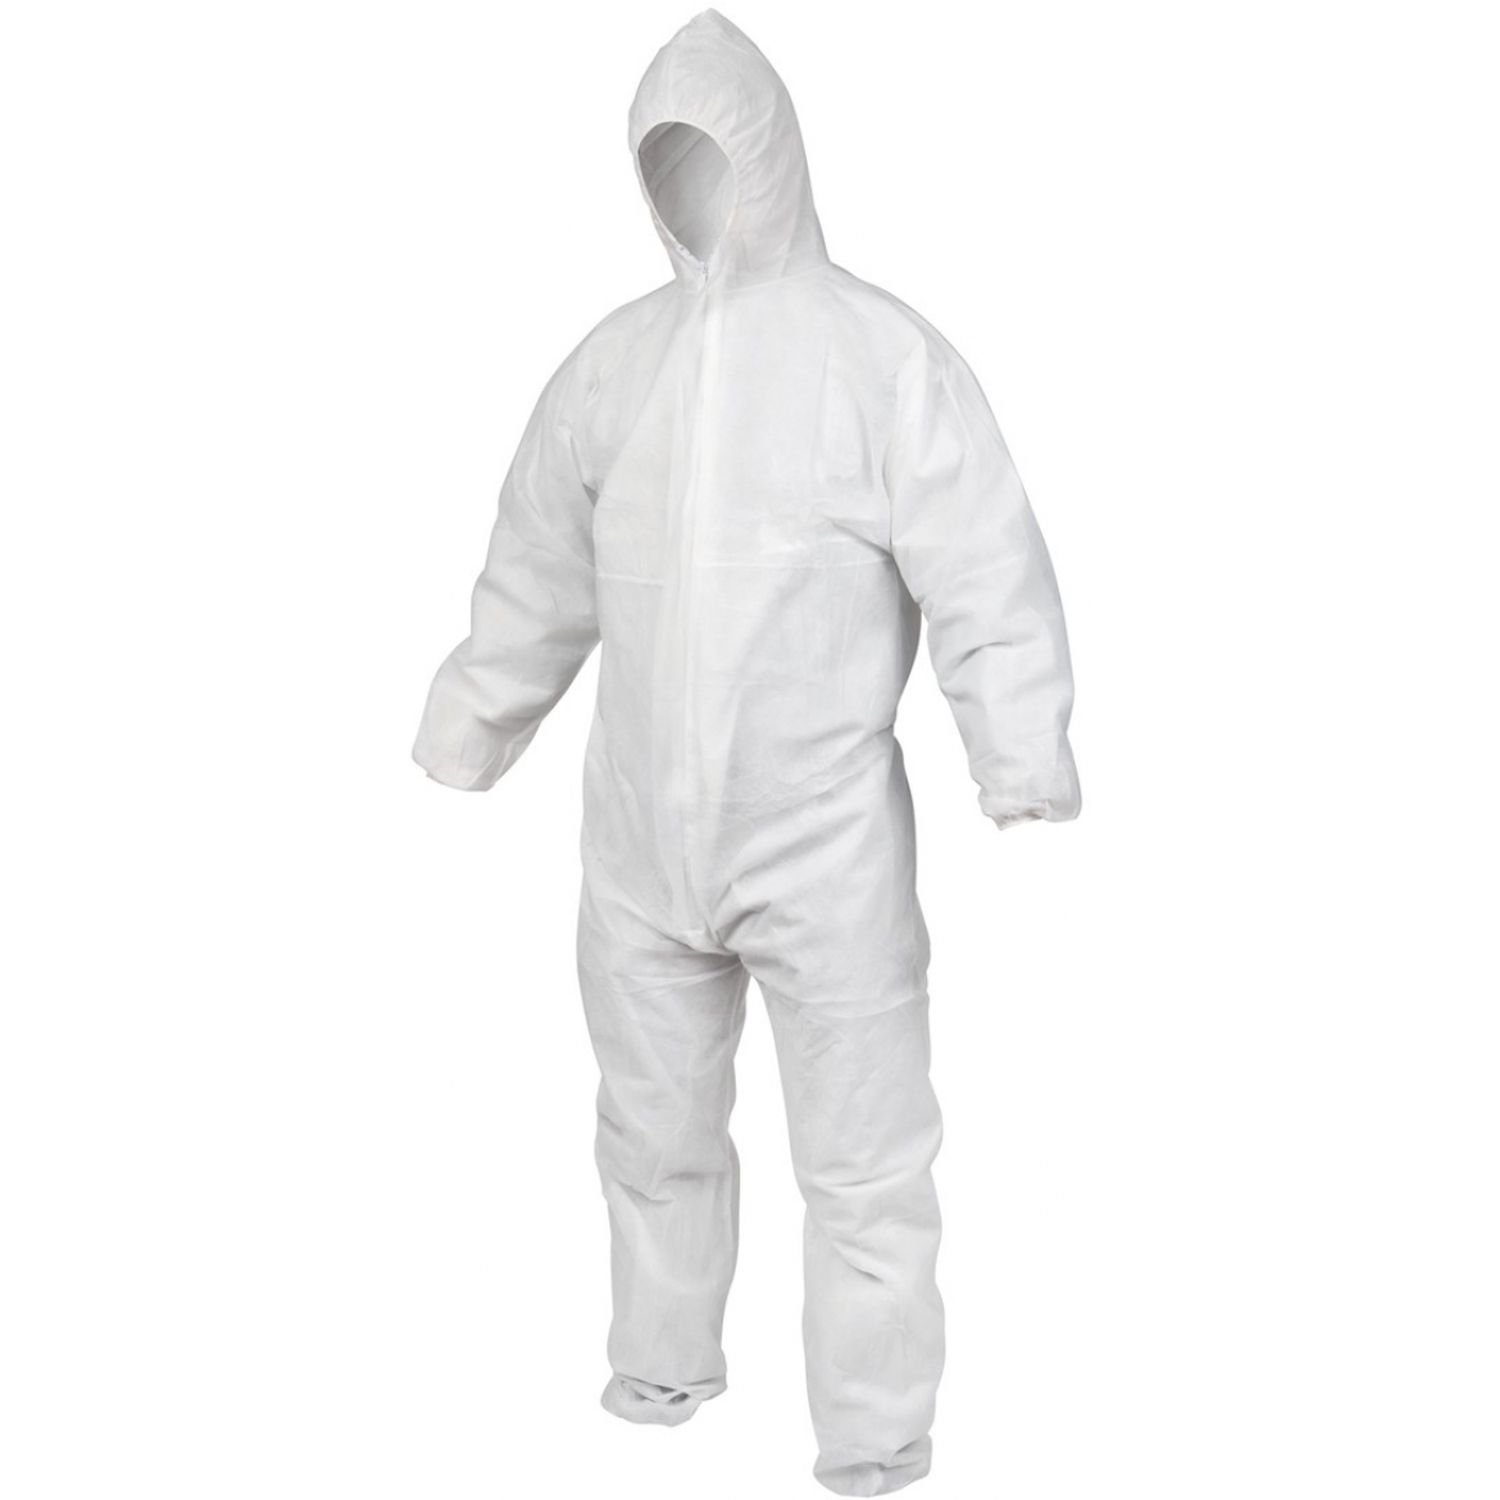 Titan 380 Disposable Coveralls Each - Breathable Waterproof Type 5B & 6B